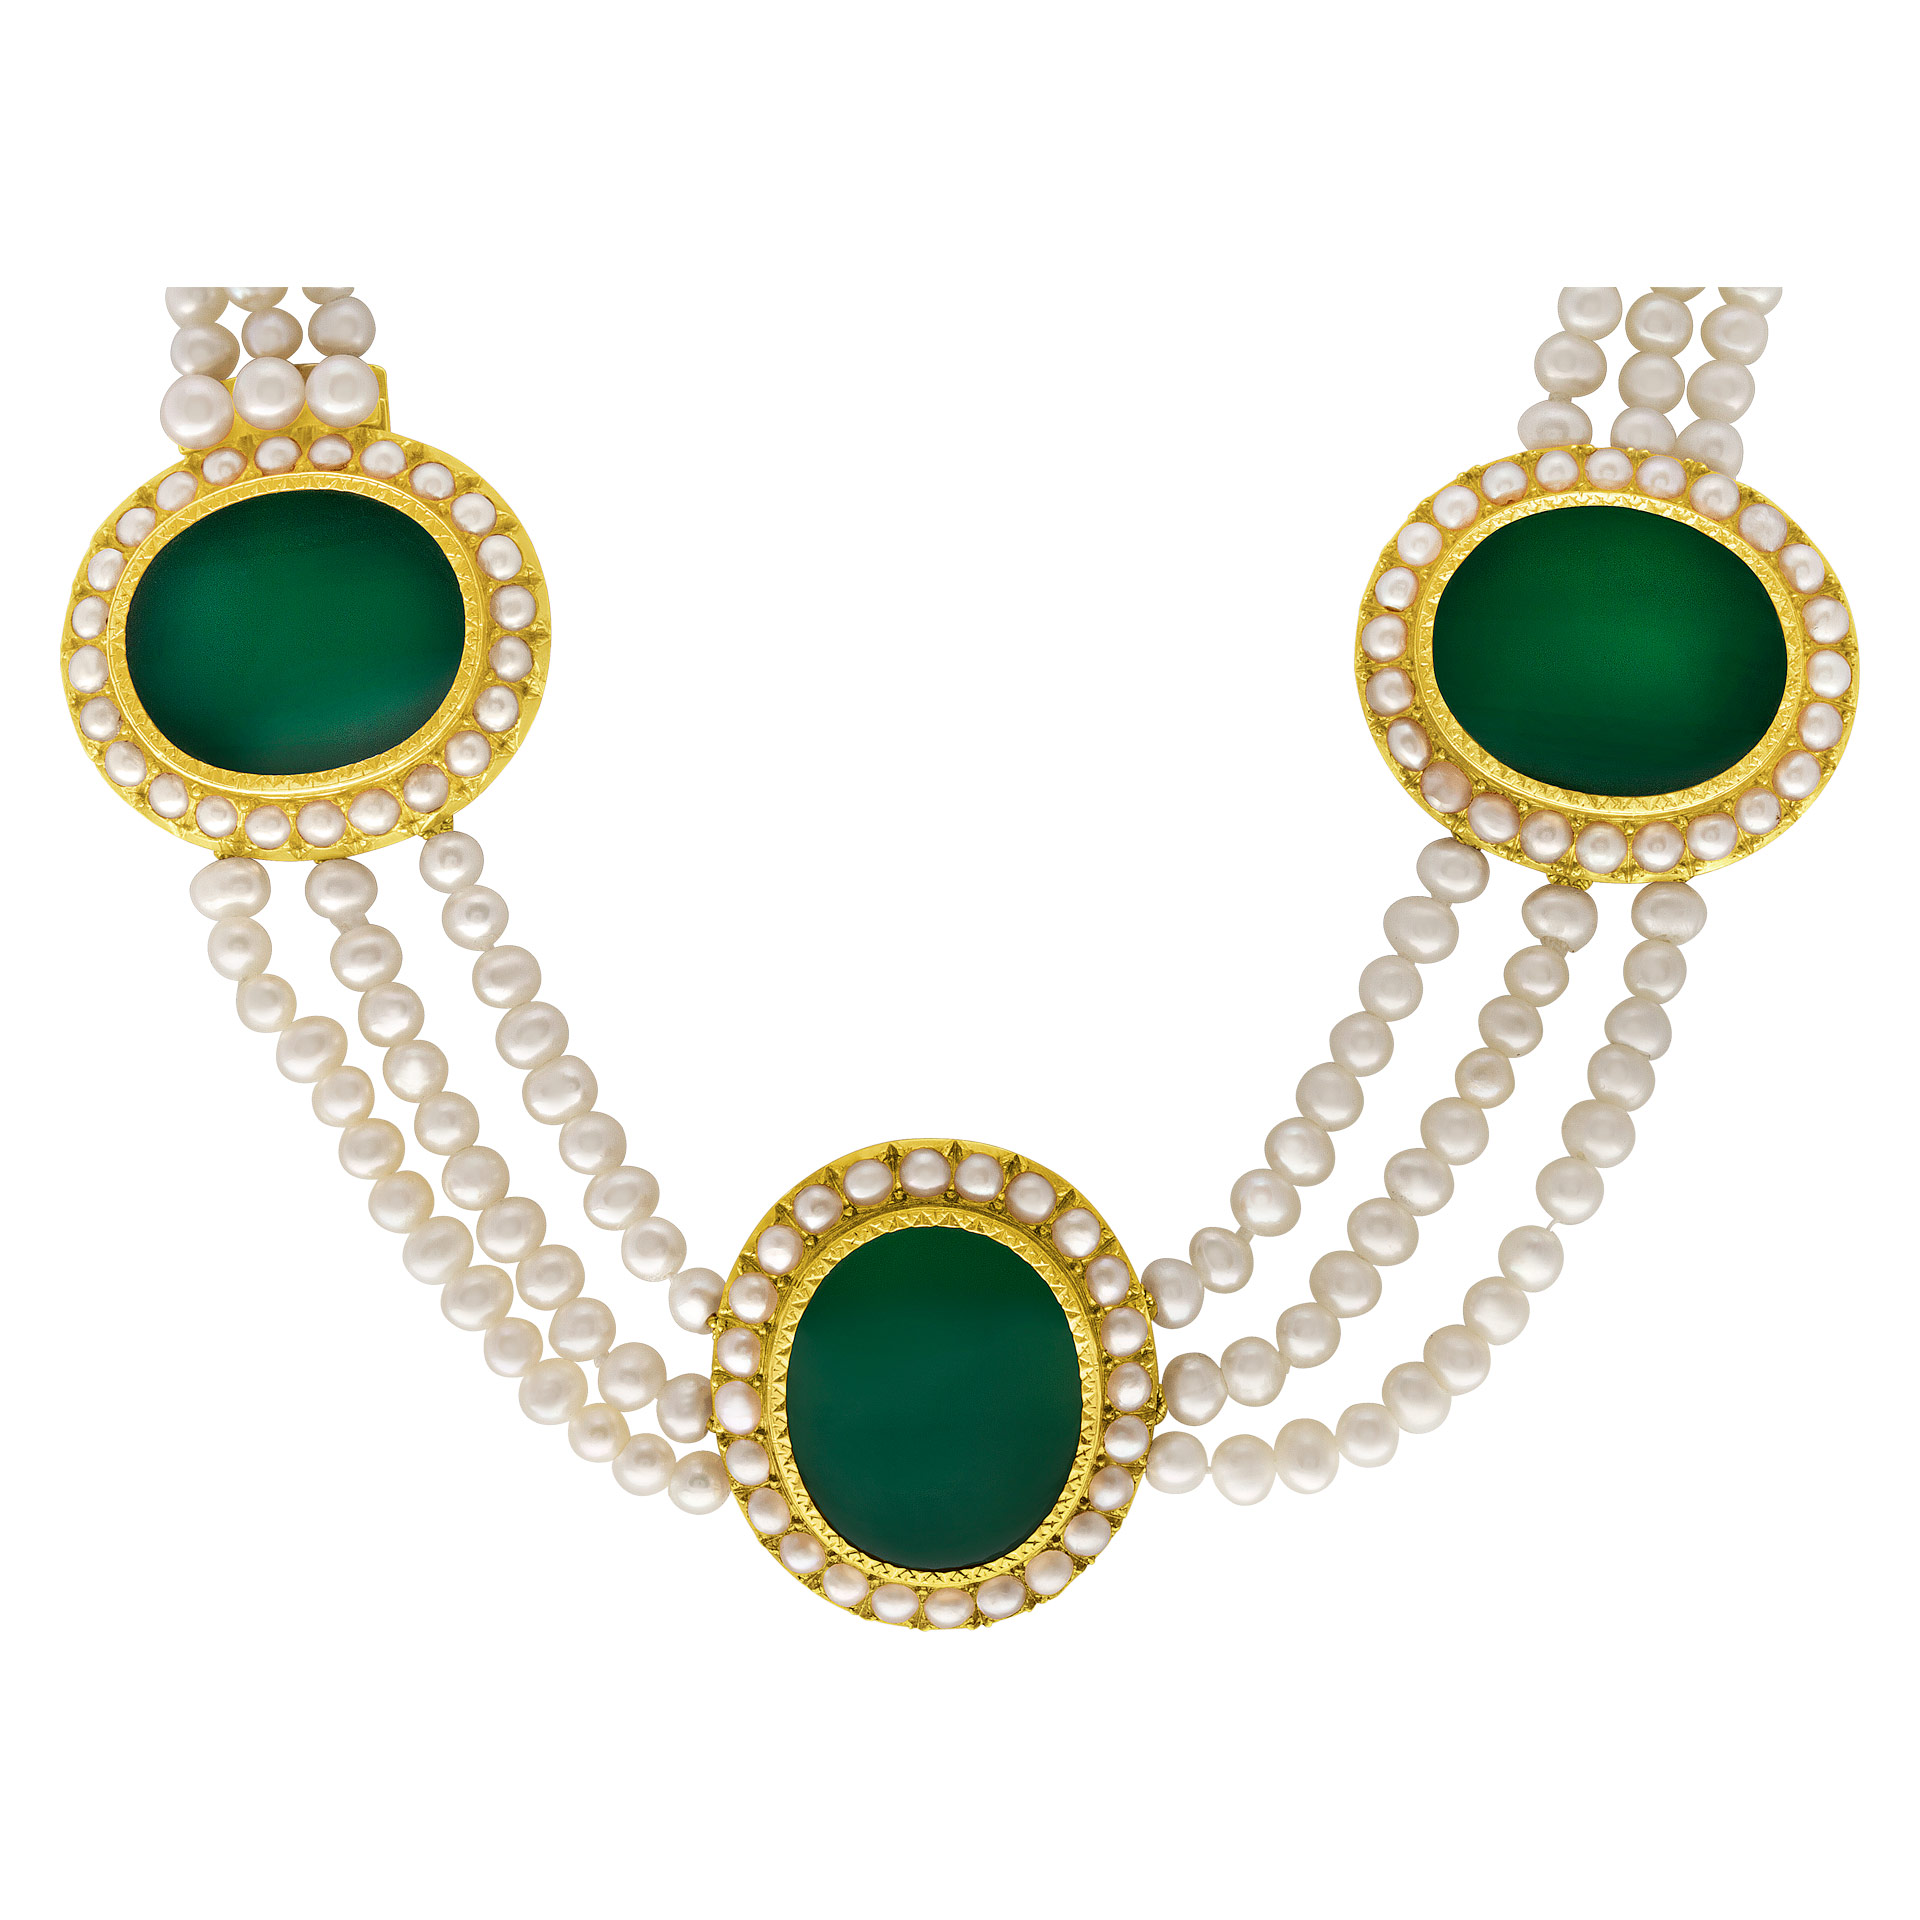 Amazing vintage jade and pearl necklace in 18k image 1